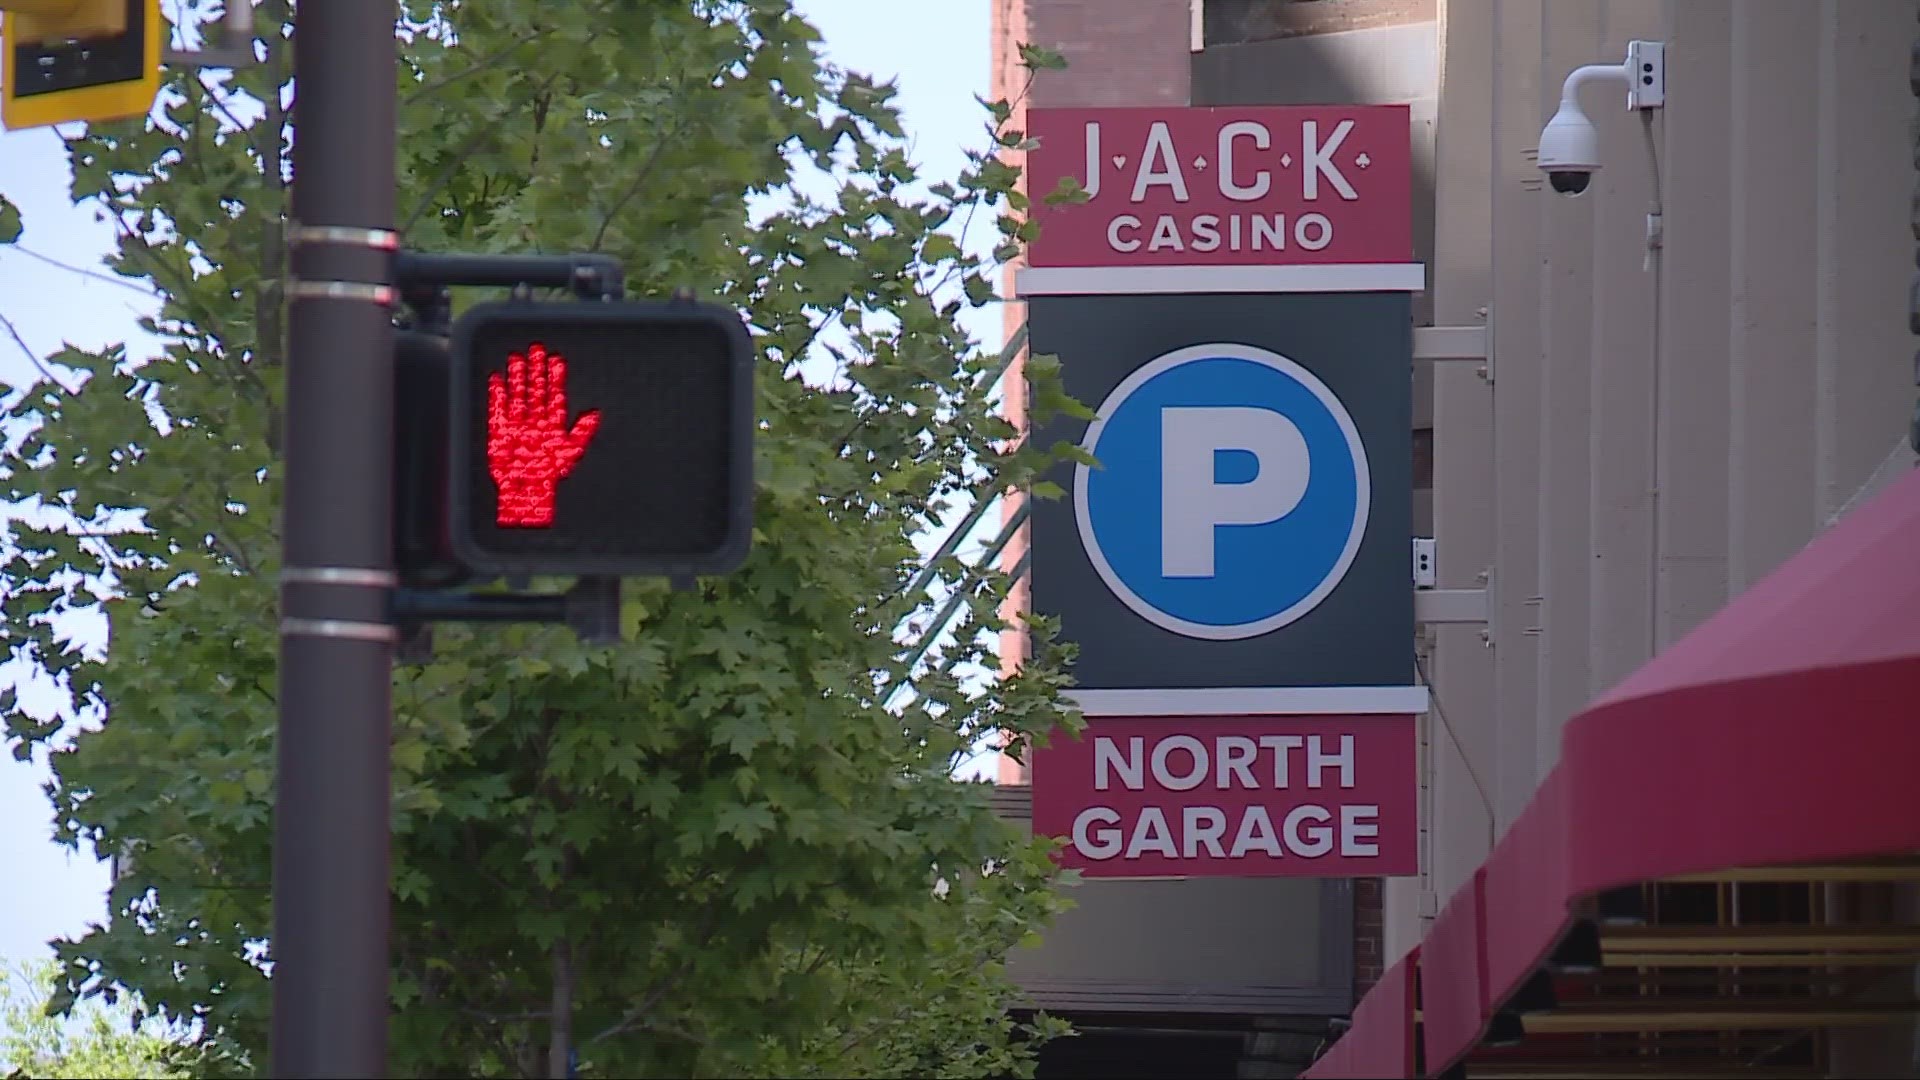 JACK North Garage, with its 687 parking spots, will open on Friday at the corner of Prospect Avenue and Ontario Street.